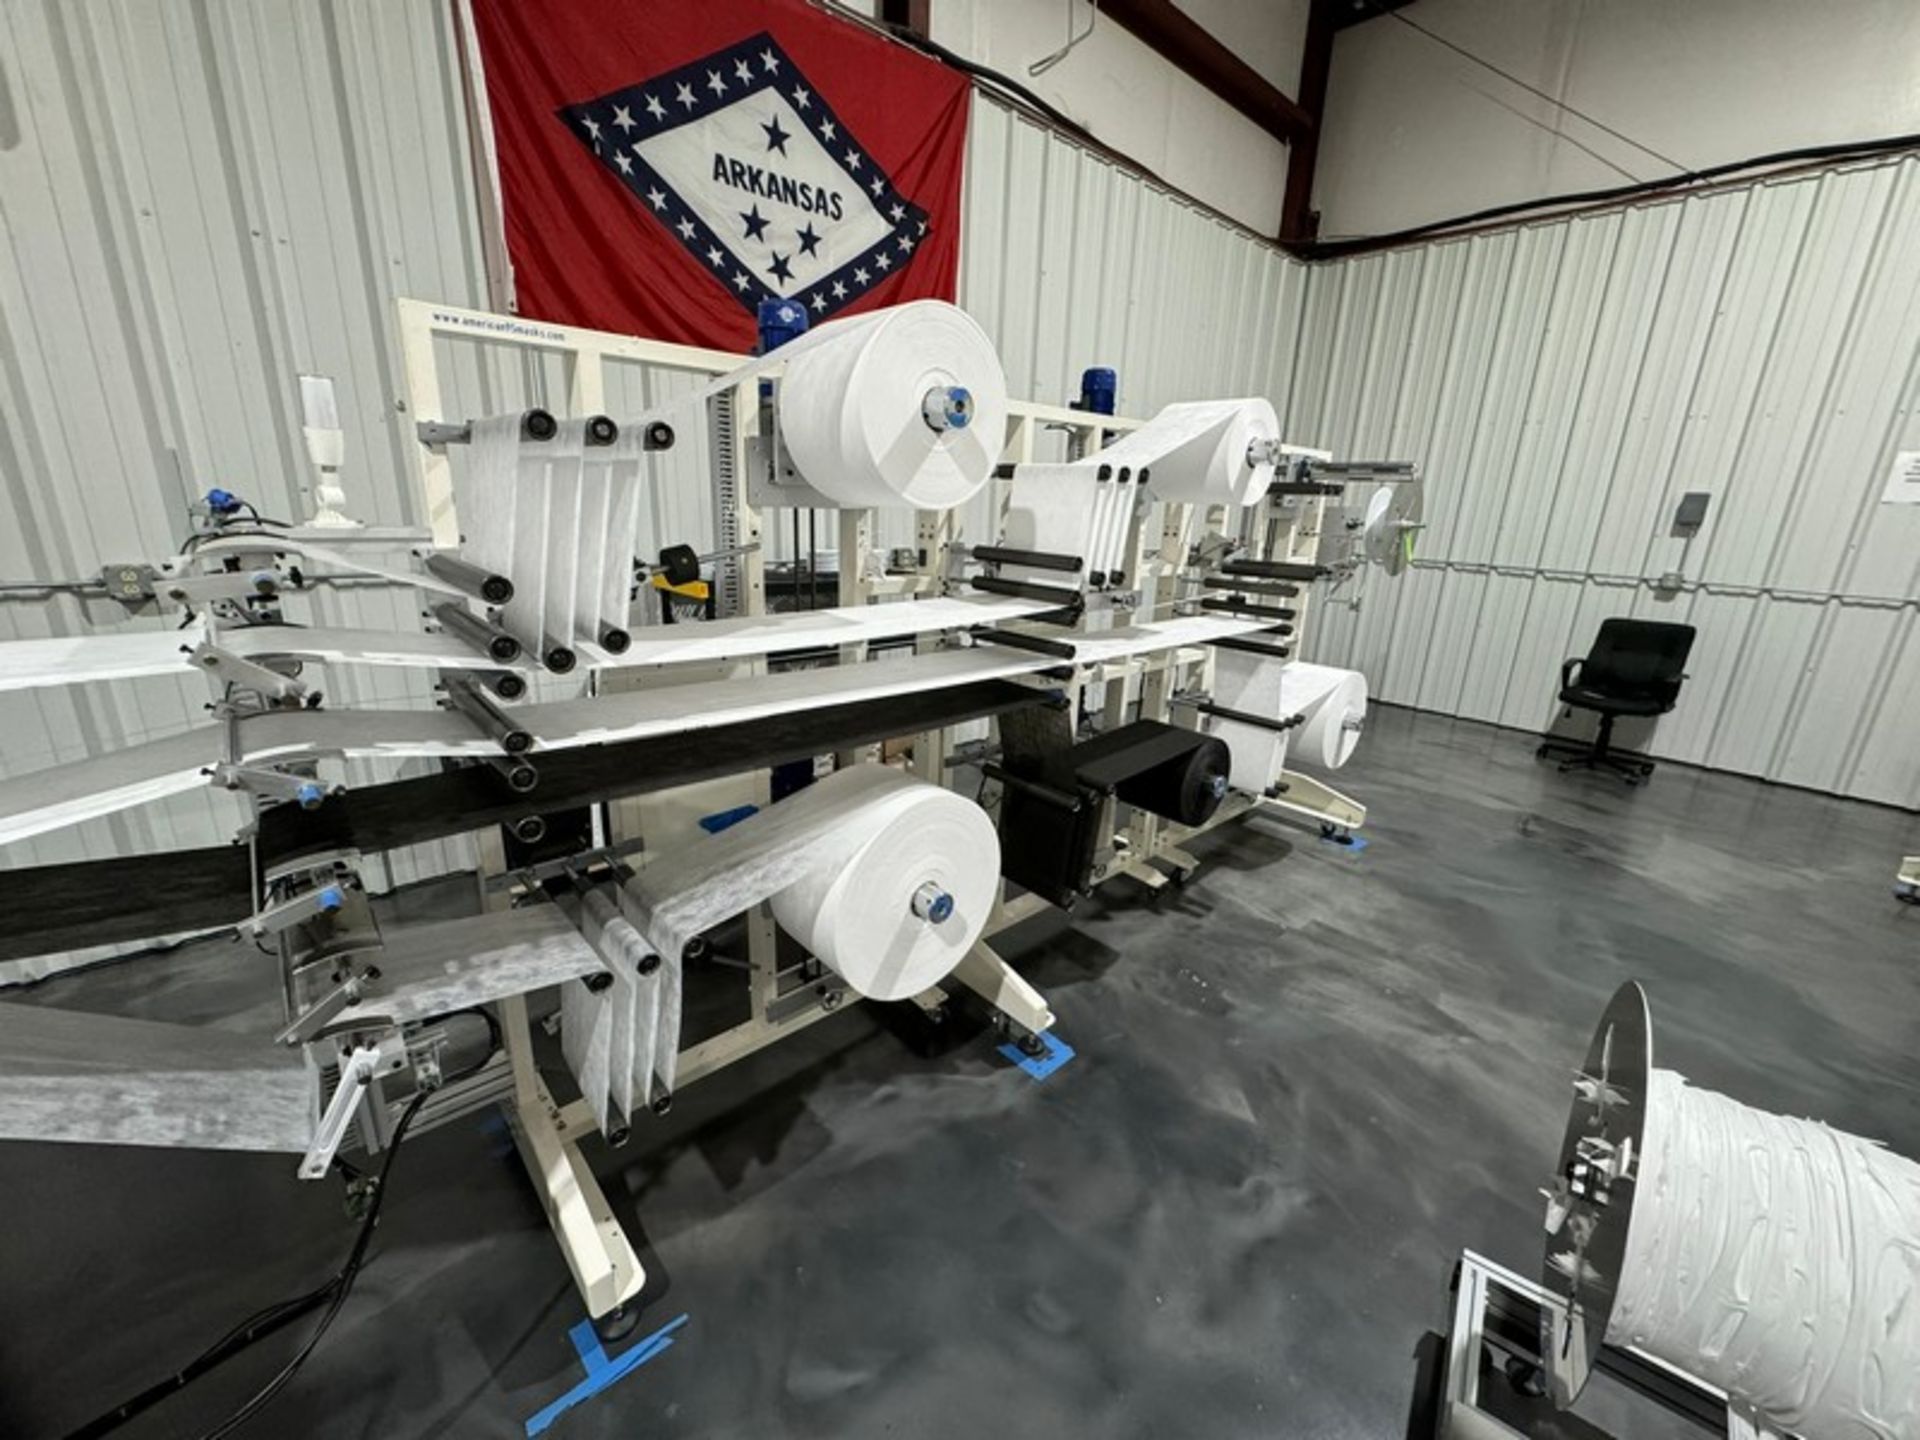 2022 KYD Automatic 4,000 Units Per Hour Mask Manufacturing Line, Includes Unwinding Station, Rolling - Image 6 of 14